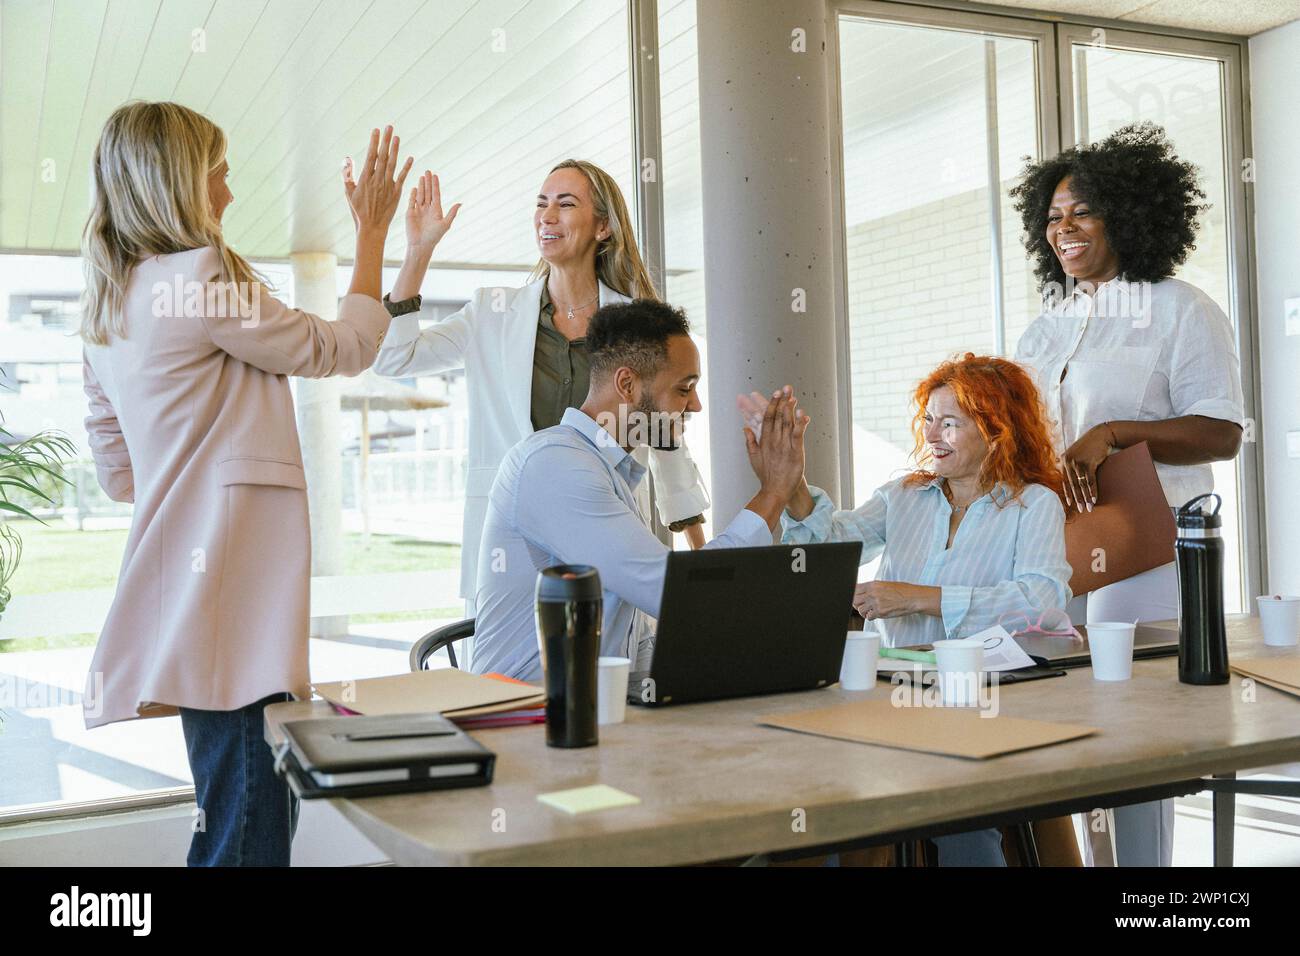 Business colleagues high-fiving while celebrating success. Business concept. Stock Photo